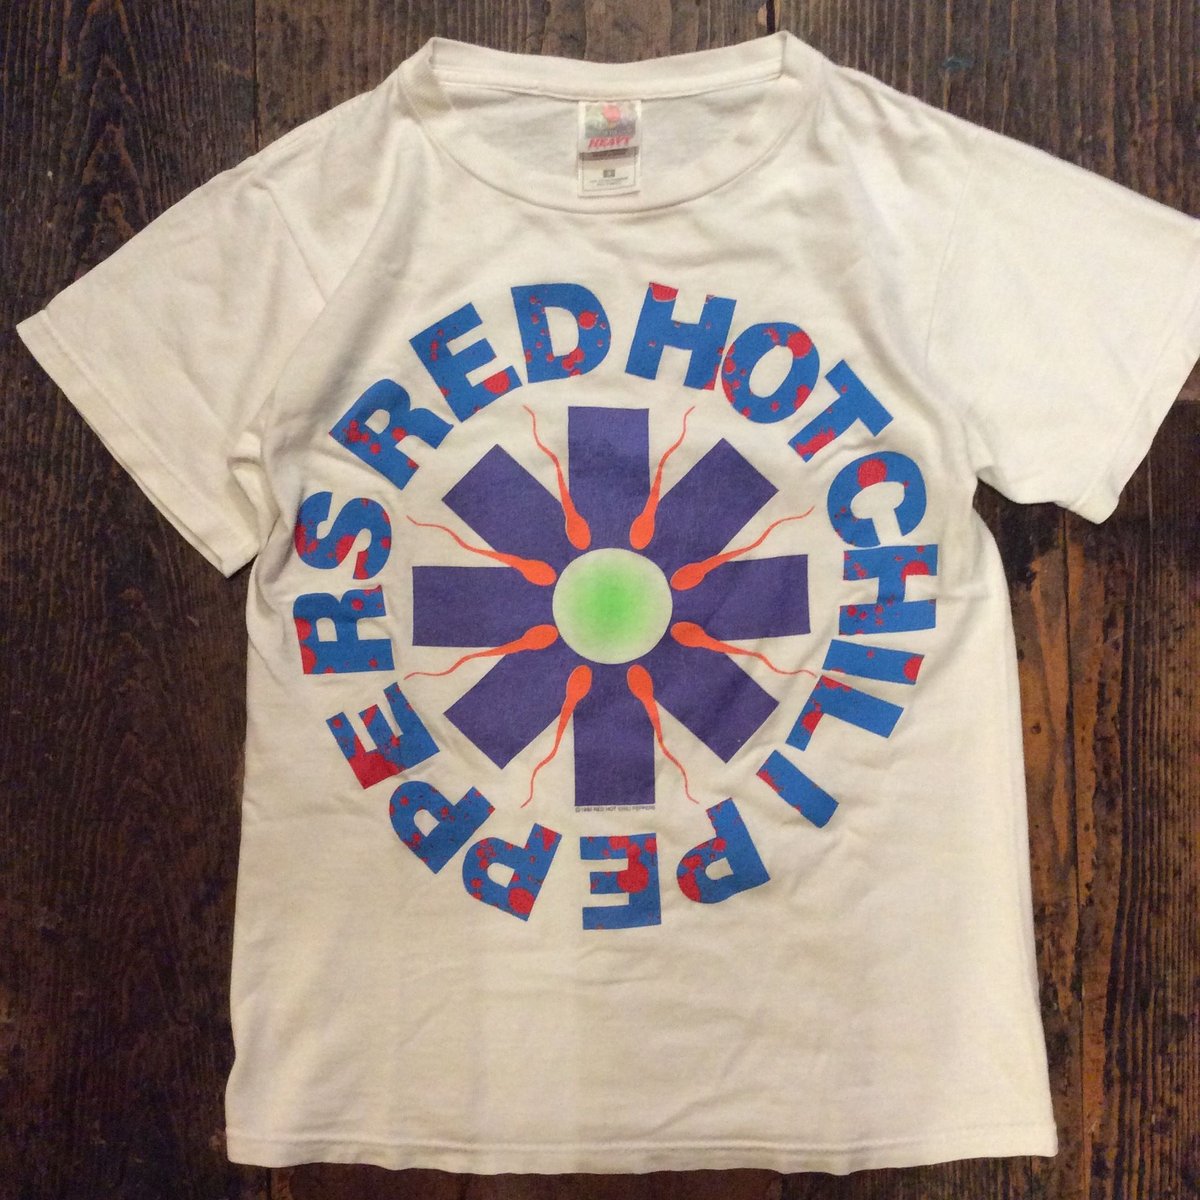 USED] 90's レッチリ Tee / Red Hot Chili Peppers |...